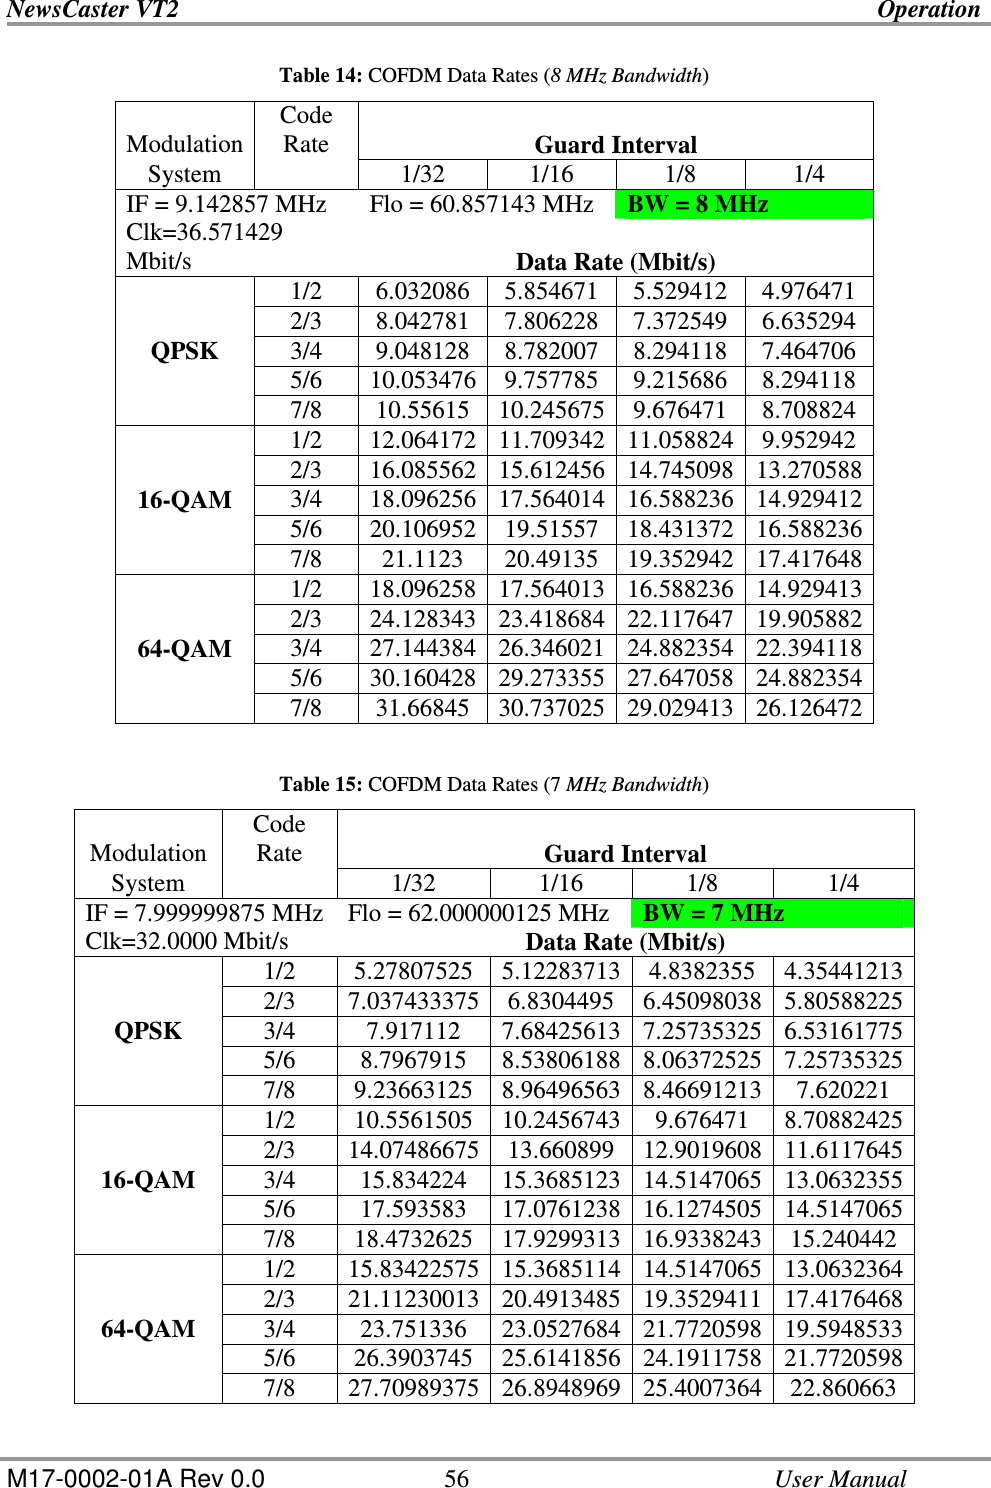 NewsCaster VT2    Operation  M17-0002-01A Rev 0.0  56    User Manual Table 14: COFDM Data Rates (8 MHz Bandwidth) Modulation Code Rate  Guard Interval System     1/32  1/16  1/8  1/4 IF = 9.142857 MHz  Flo = 60.857143 MHz  BW = 8 MHz Clk=36.571429 Mbit/s  Data Rate (Mbit/s)    1/2  6.032086  5.854671  5.529412  4.976471    2/3  8.042781  7.806228  7.372549  6.635294 QPSK  3/4  9.048128  8.782007  8.294118  7.464706    5/6  10.053476 9.757785  9.215686  8.294118    7/8  10.55615  10.245675 9.676471  8.708824    1/2  12.064172 11.709342 11.058824 9.952942    2/3  16.085562 15.612456 14.745098 13.270588 16-QAM  3/4  18.096256 17.564014 16.588236 14.929412    5/6  20.106952 19.51557  18.431372 16.588236    7/8  21.1123  20.49135  19.352942 17.417648    1/2  18.096258 17.564013 16.588236 14.929413    2/3  24.128343 23.418684 22.117647 19.905882 64-QAM  3/4  27.144384 26.346021 24.882354 22.394118    5/6  30.160428 29.273355 27.647058 24.882354    7/8  31.66845  30.737025 29.029413 26.126472  Table 15: COFDM Data Rates (7 MHz Bandwidth) Modulation  Code Rate  Guard Interval System     1/32  1/16  1/8  1/4 IF = 7.999999875 MHz  Flo = 62.000000125 MHz  BW = 7 MHz Clk=32.0000 Mbit/s  Data Rate (Mbit/s)    1/2  5.27807525  5.12283713 4.8382355  4.35441213    2/3  7.037433375 6.8304495  6.45098038 5.80588225 QPSK  3/4  7.917112  7.68425613 7.25735325 6.53161775    5/6  8.7967915  8.53806188 8.06372525 7.25735325    7/8  9.23663125  8.96496563 8.46691213 7.620221    1/2  10.5561505  10.2456743 9.676471  8.70882425    2/3  14.07486675 13.660899  12.9019608 11.6117645 16-QAM  3/4  15.834224  15.3685123 14.5147065 13.0632355    5/6  17.593583  17.0761238 16.1274505 14.5147065    7/8  18.4732625  17.9299313 16.9338243 15.240442    1/2  15.83422575 15.3685114 14.5147065 13.0632364    2/3  21.11230013 20.4913485 19.3529411 17.4176468 64-QAM  3/4  23.751336  23.0527684 21.7720598 19.5948533    5/6  26.3903745  25.6141856 24.1911758 21.7720598    7/8  27.70989375 26.8948969 25.4007364 22.860663  